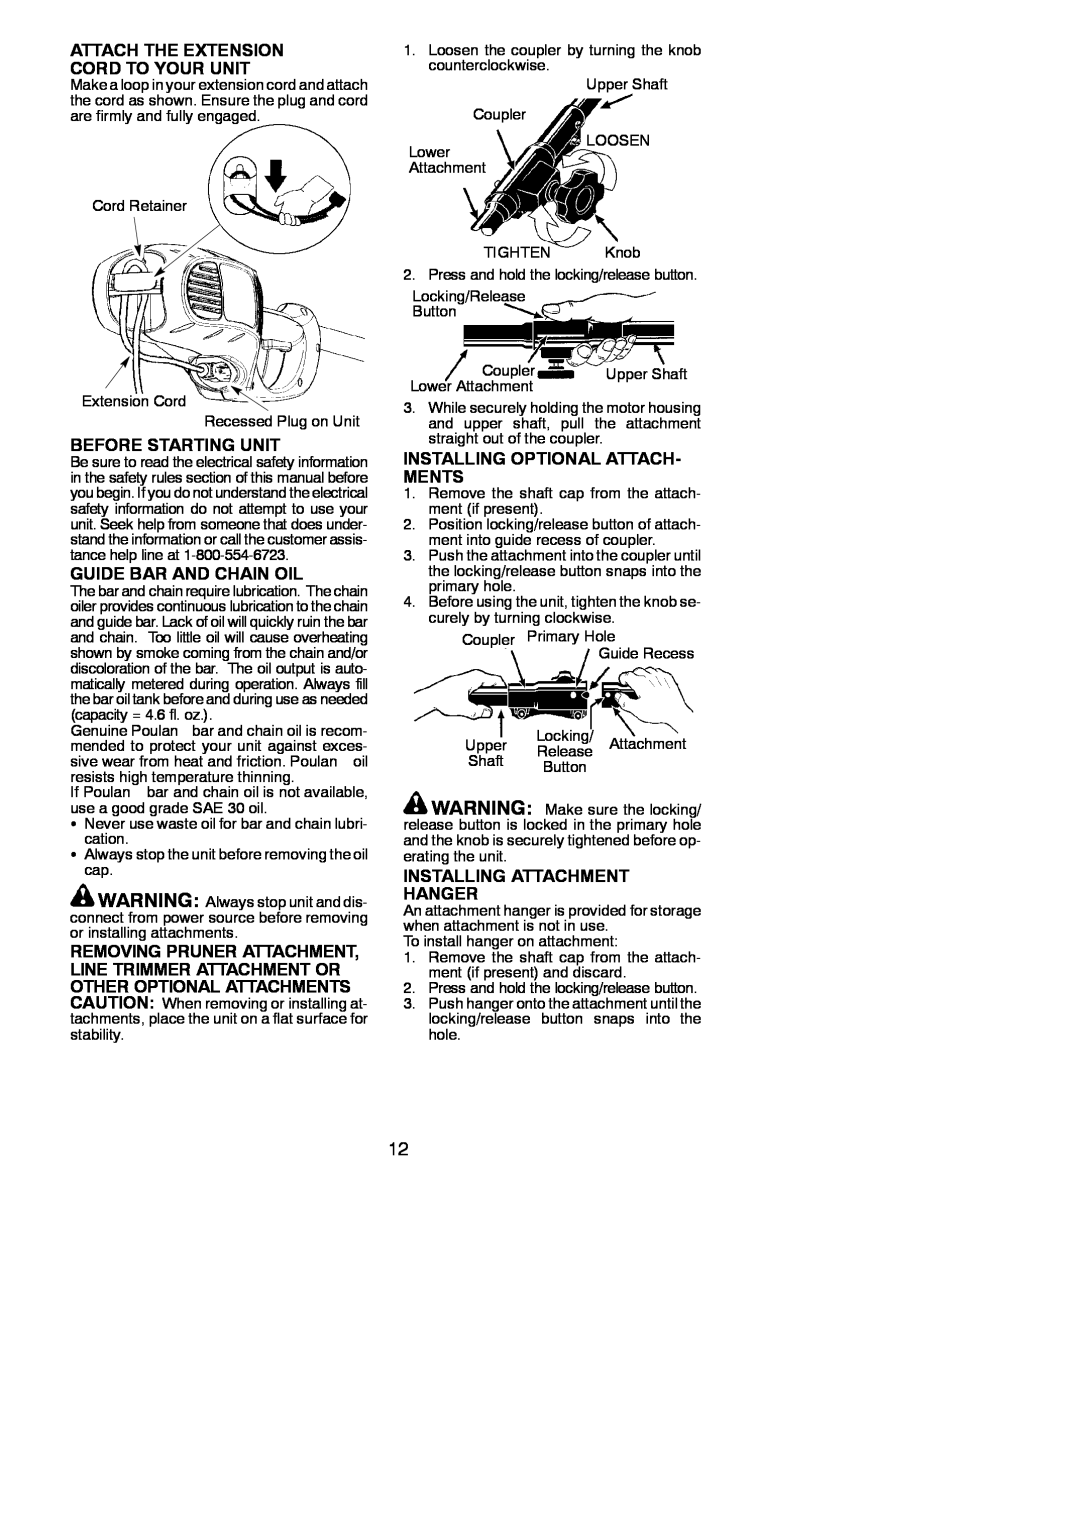 Poulan 810 EPT instruction manual Attach The Extension Cord To Your Unit, Before Starting Unit, Guide Bar And Chain Oil 